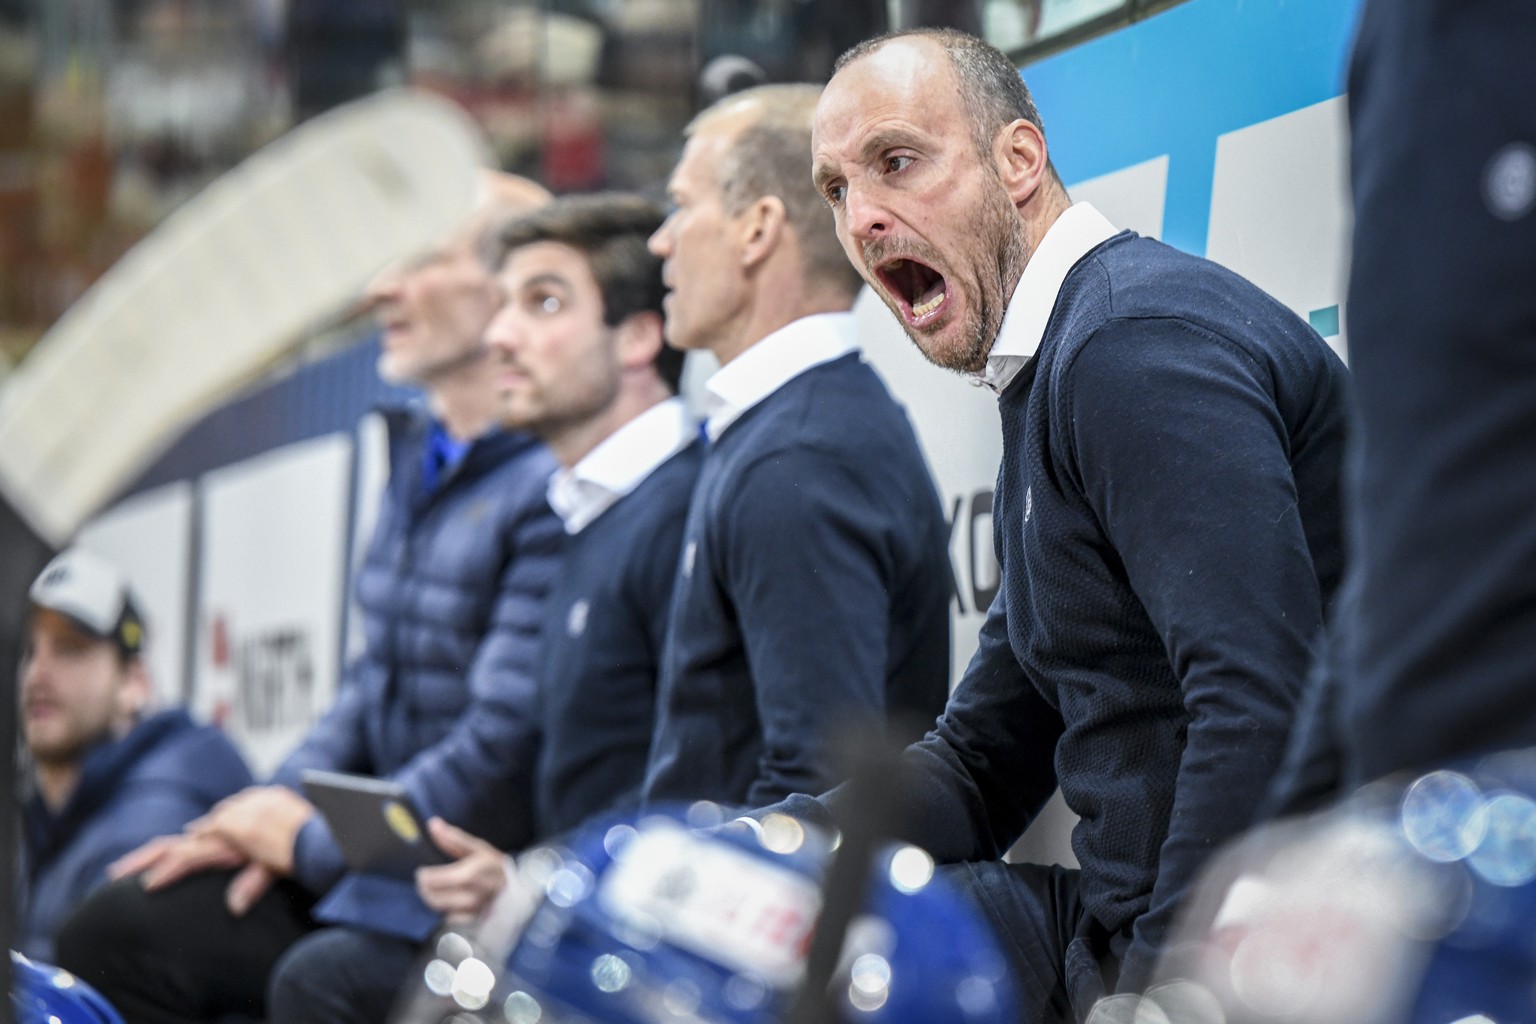 Davos&#039; head coach Christian Wohlwend during the game between Team Canada and HC Davos, at the 93th Spengler Cup ice hockey tournament in Davos, Switzerland, Saturday, December 28, 2019. (KEYSTONE ...